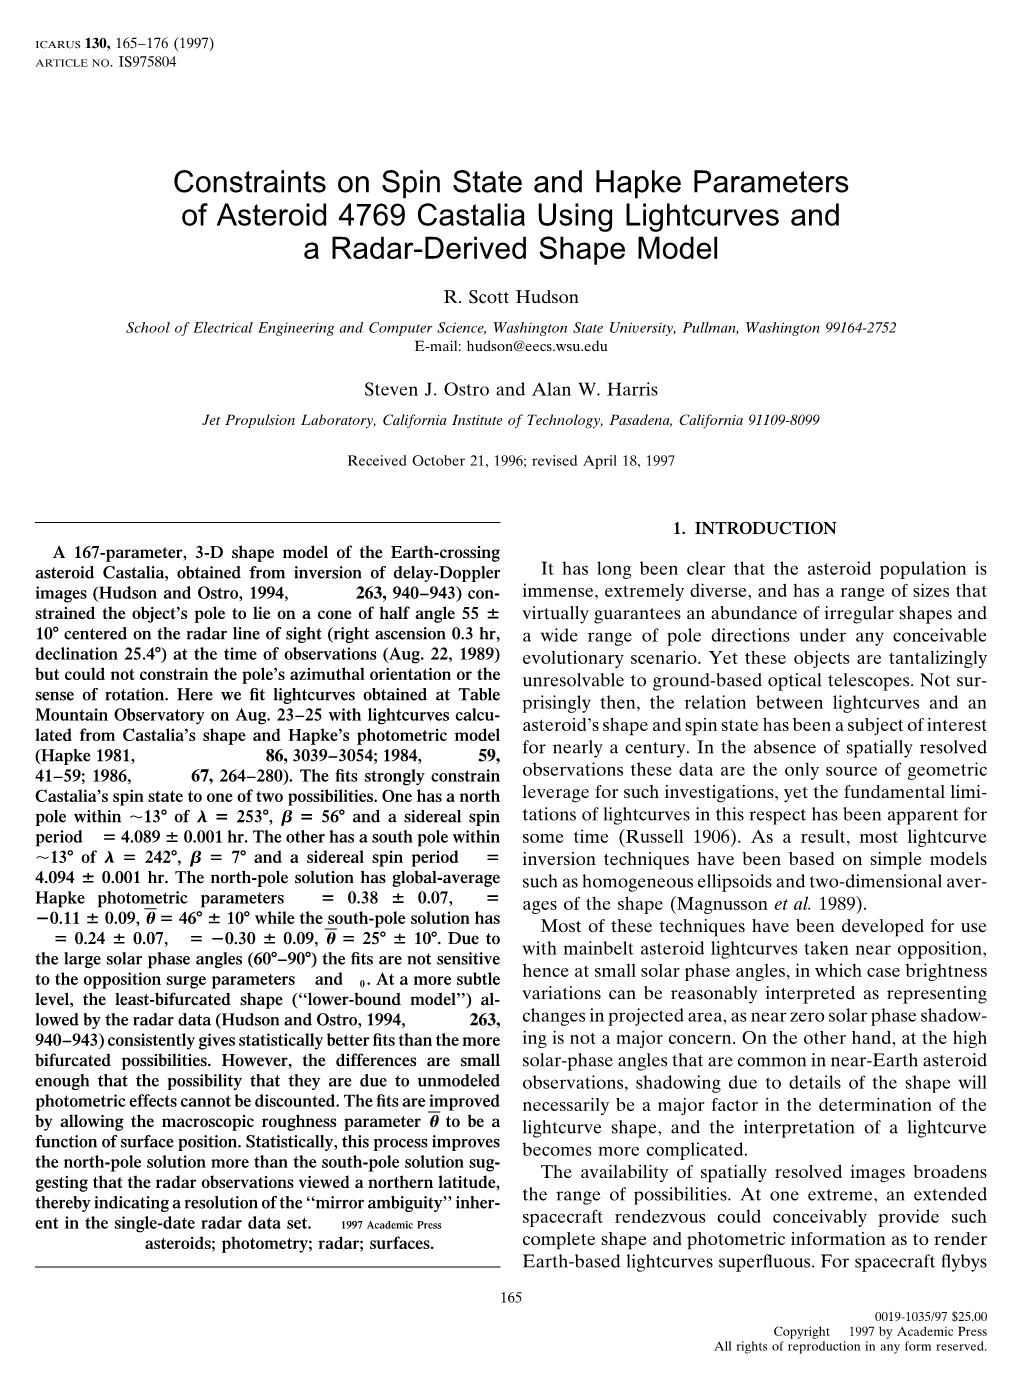 Constraints on Spin State and Hapke Parameters of Asteroid 4769 Castalia Using Lightcurves and a Radar-Derived Shape Model